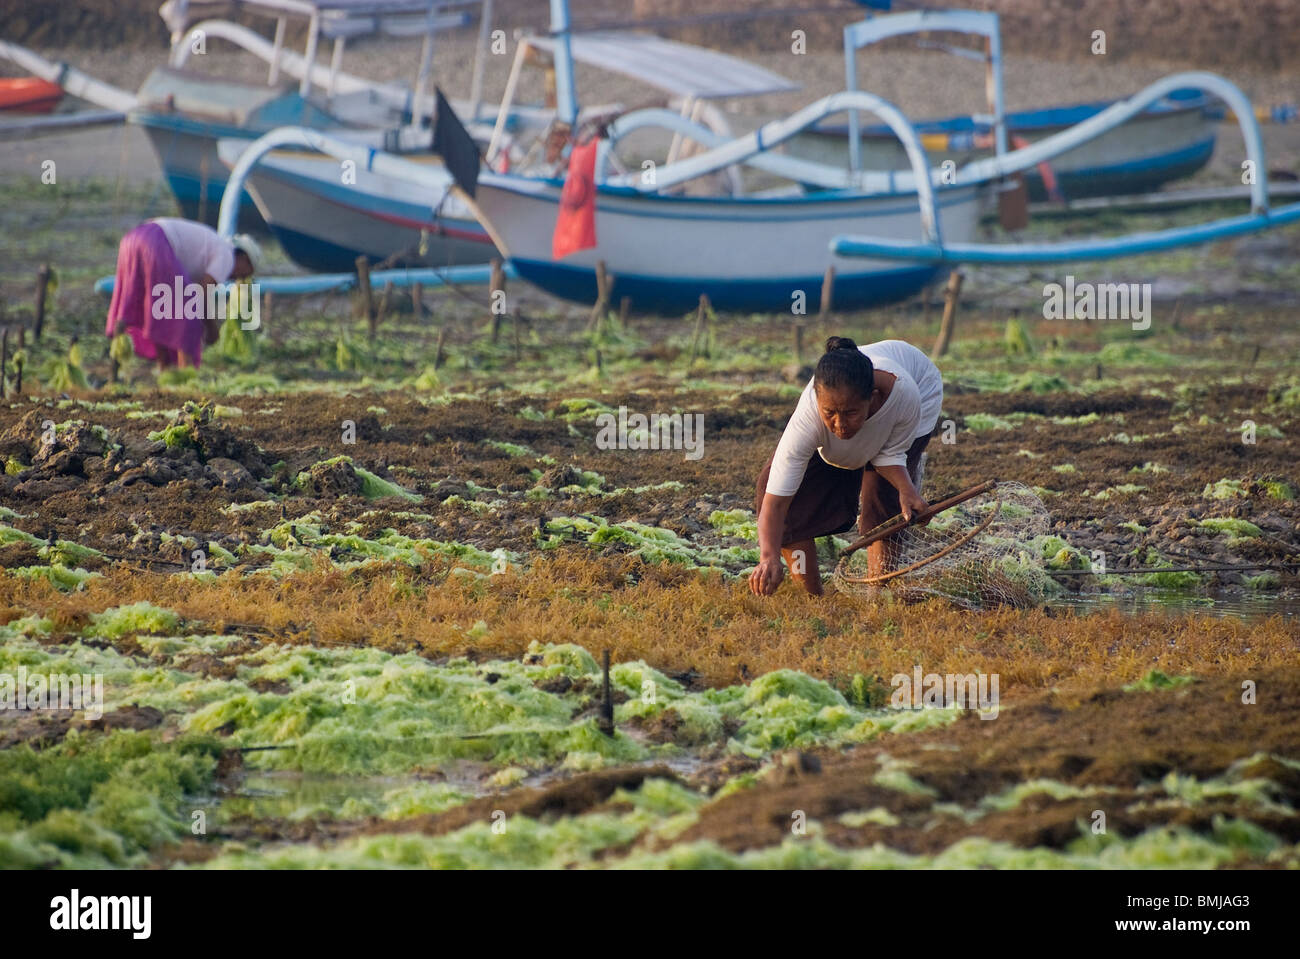 Early in the morning when the tide is low seaweed farmers come to the beach to harvest the crop. Seen on Nusa Lembongan, Bali. Stock Photo